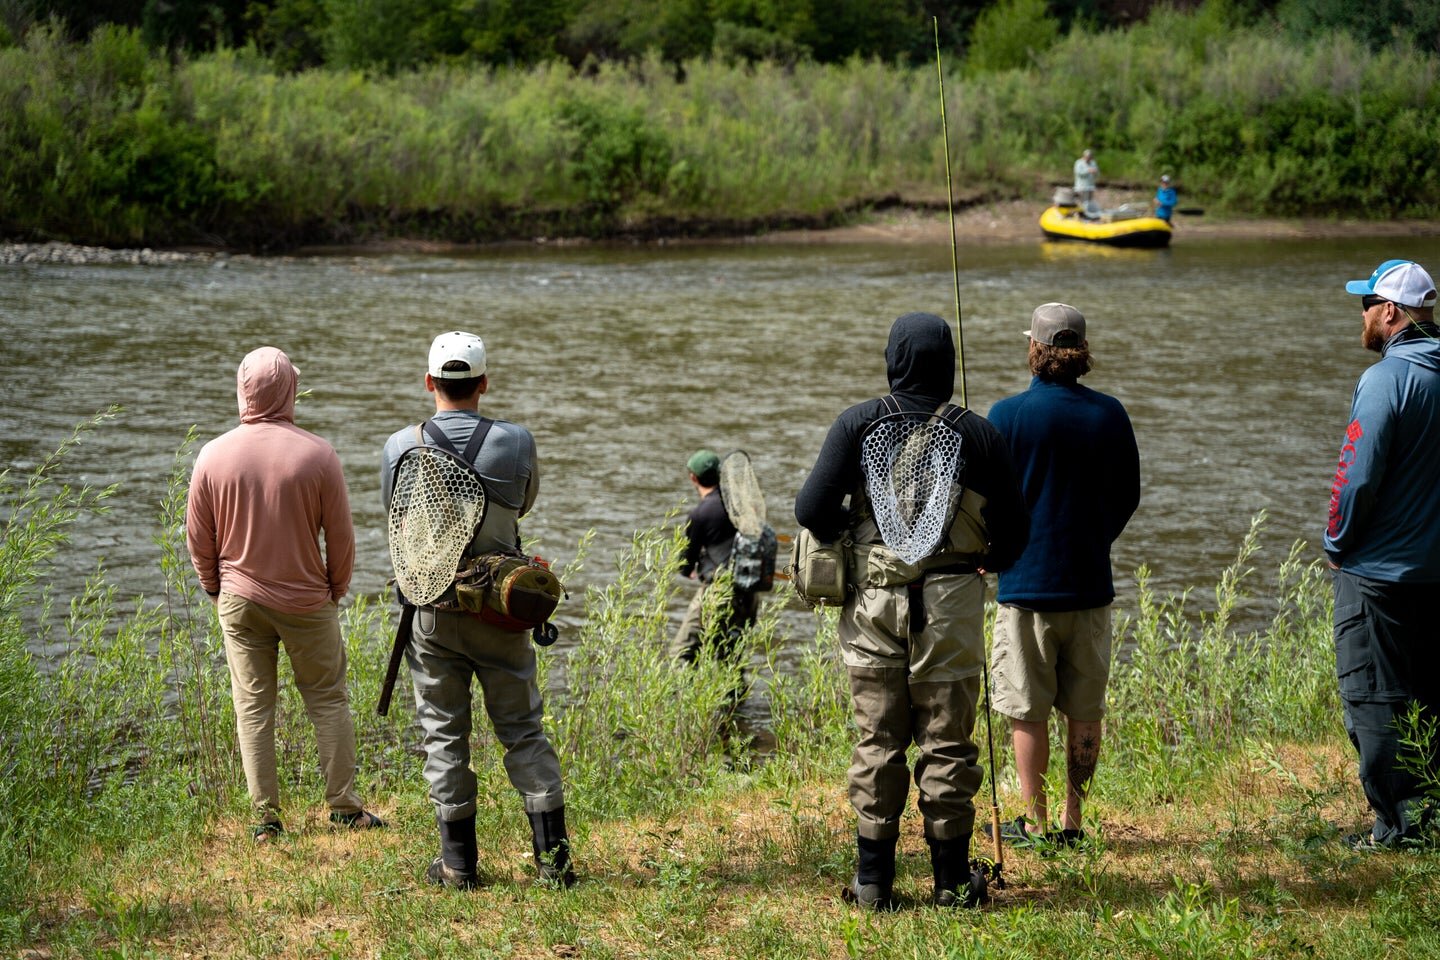 How a Colorado Nonprofit is Helping Men Fight Mental Illness by Taking Them Fishing